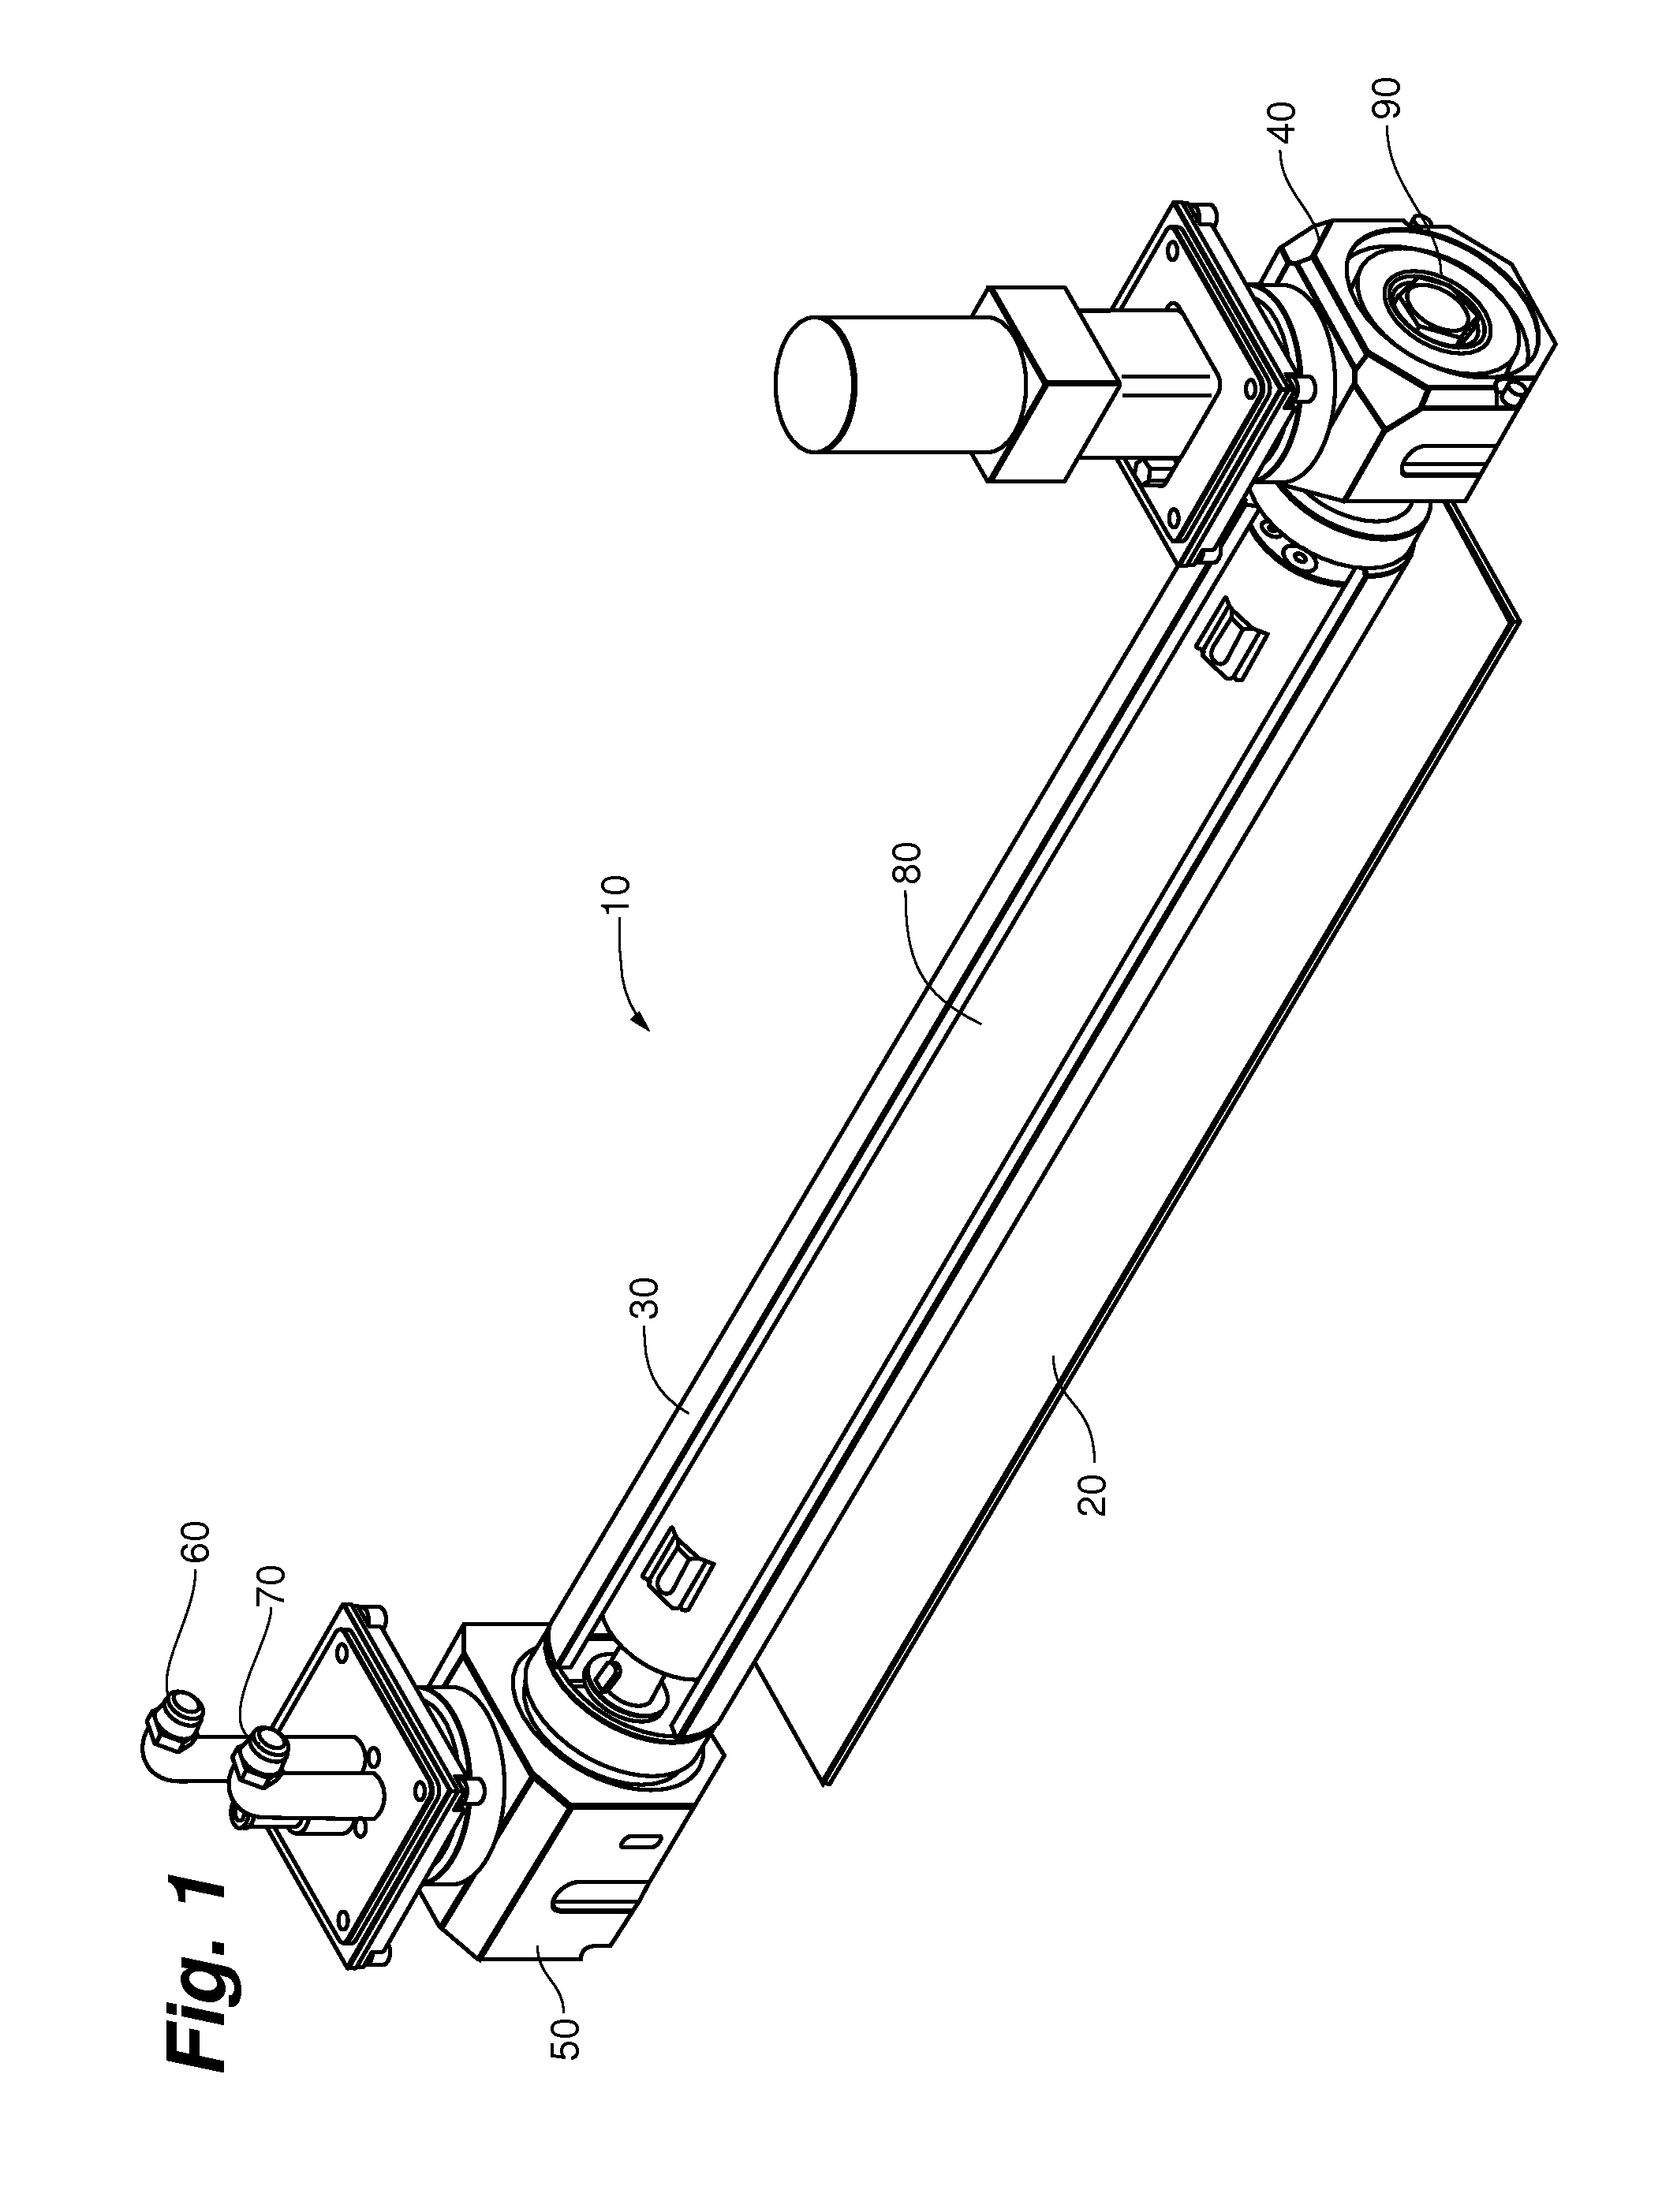 Cylindrical target with oscillating magnet for magnetron sputtering